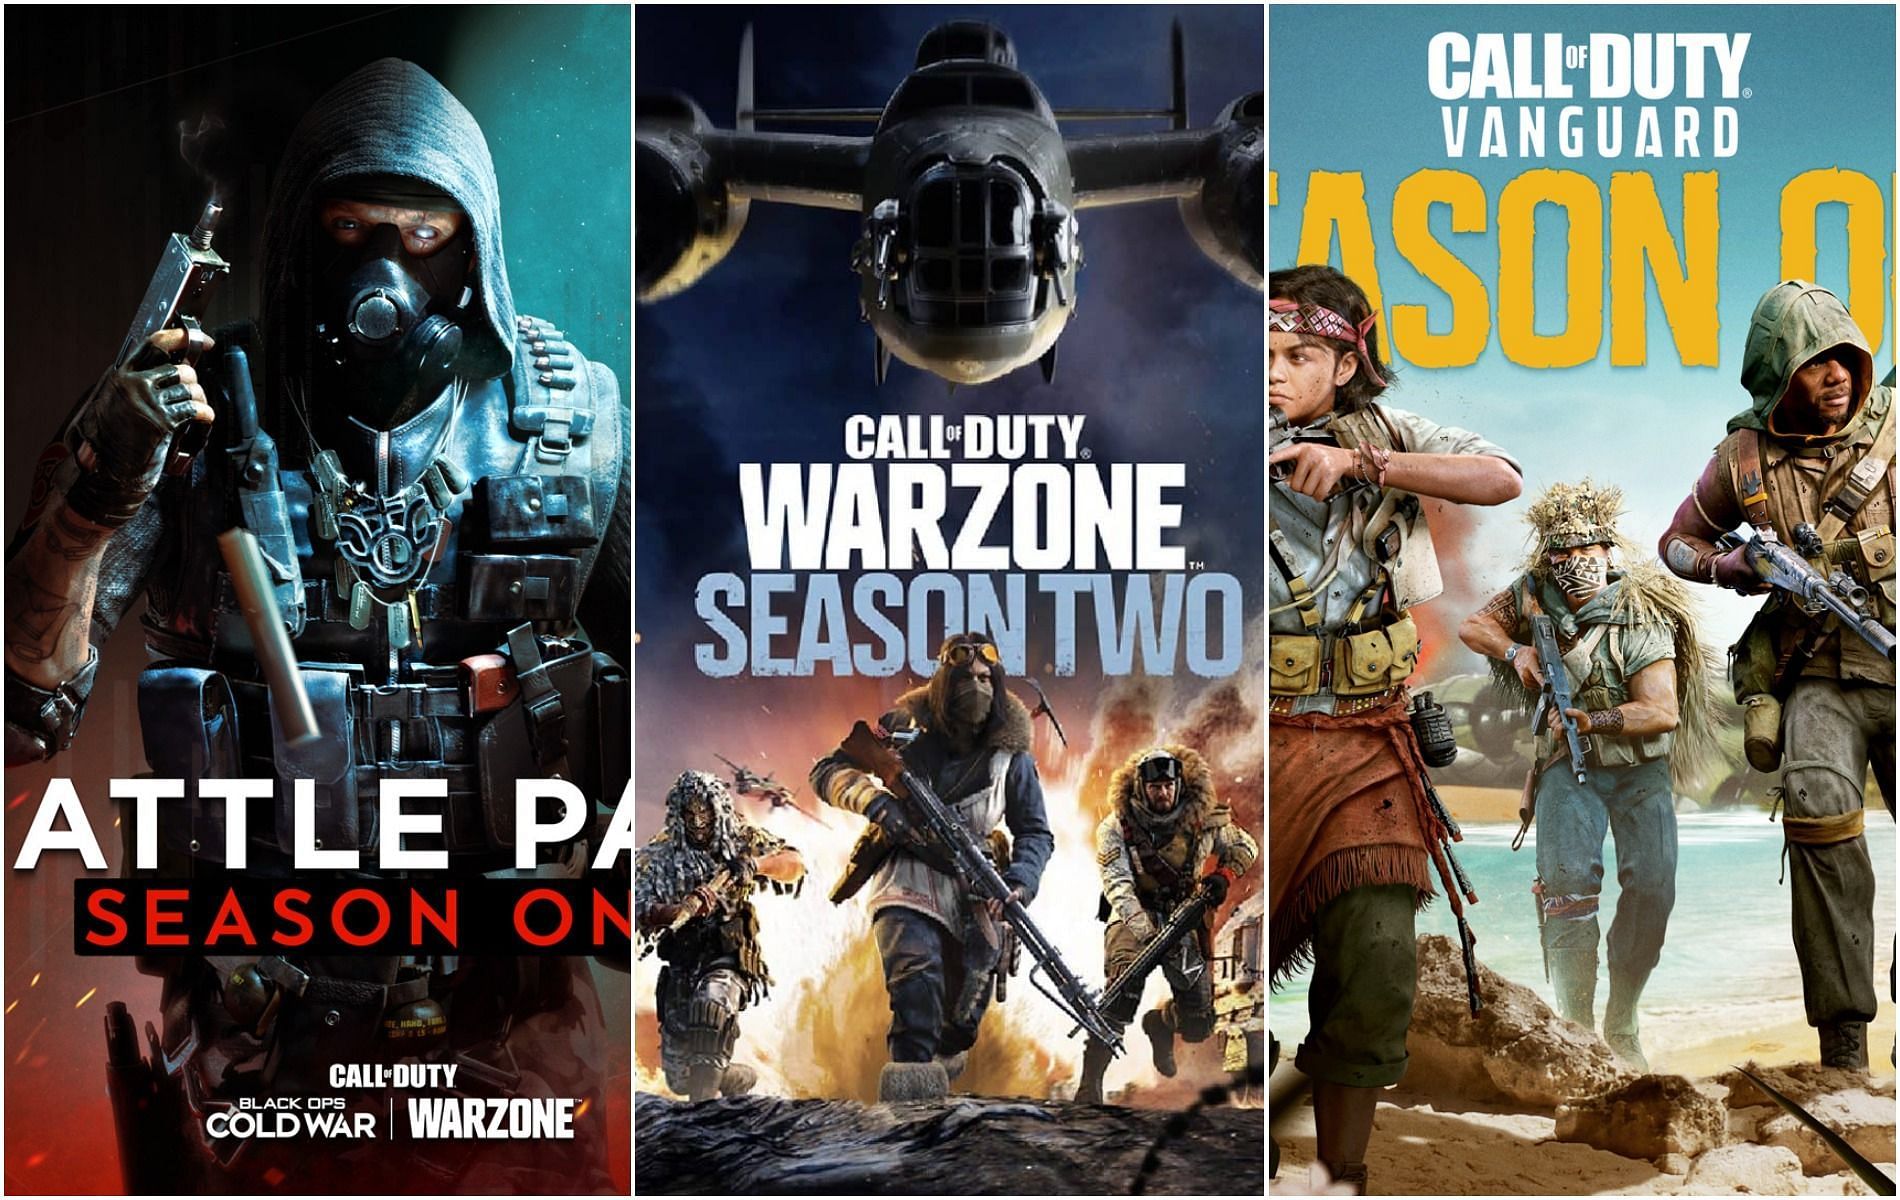 Call of Duty Warzone was labeled the &quot;Pandemic Game&quot; (Image by Activision)